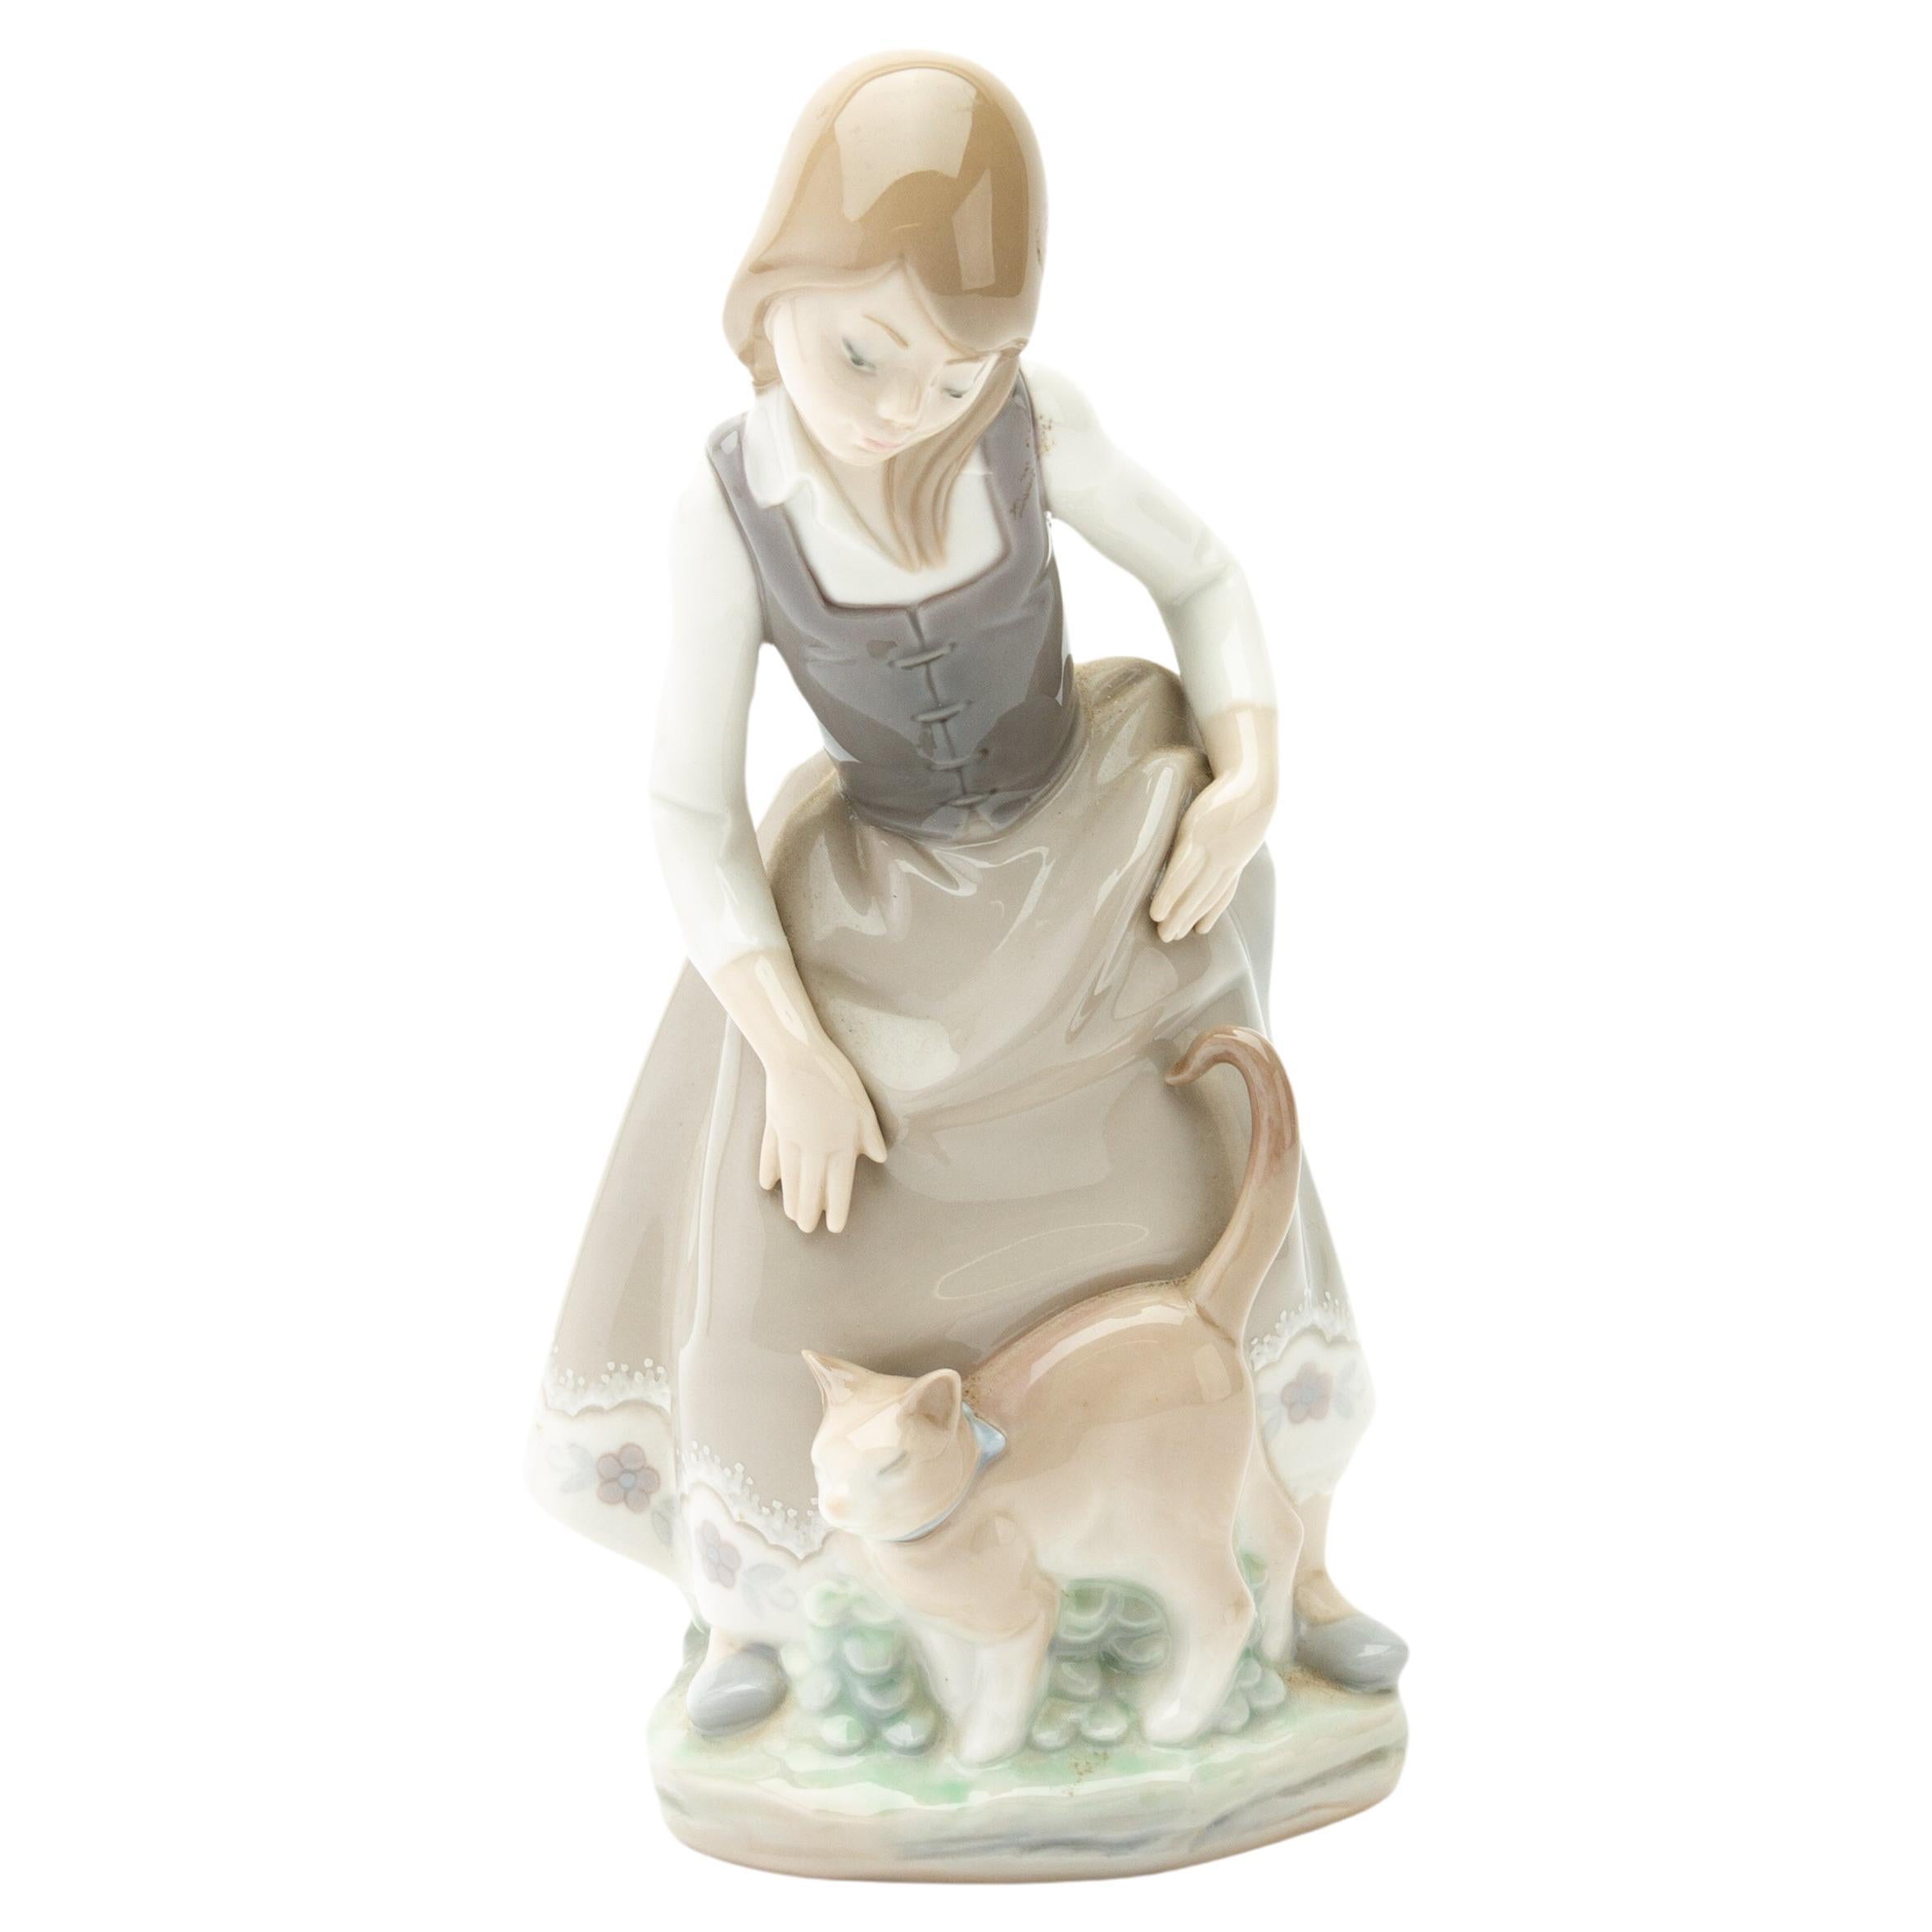 Lladro Fine Porcelain "Little Girl with Cat" #1187 Figurine For Sale